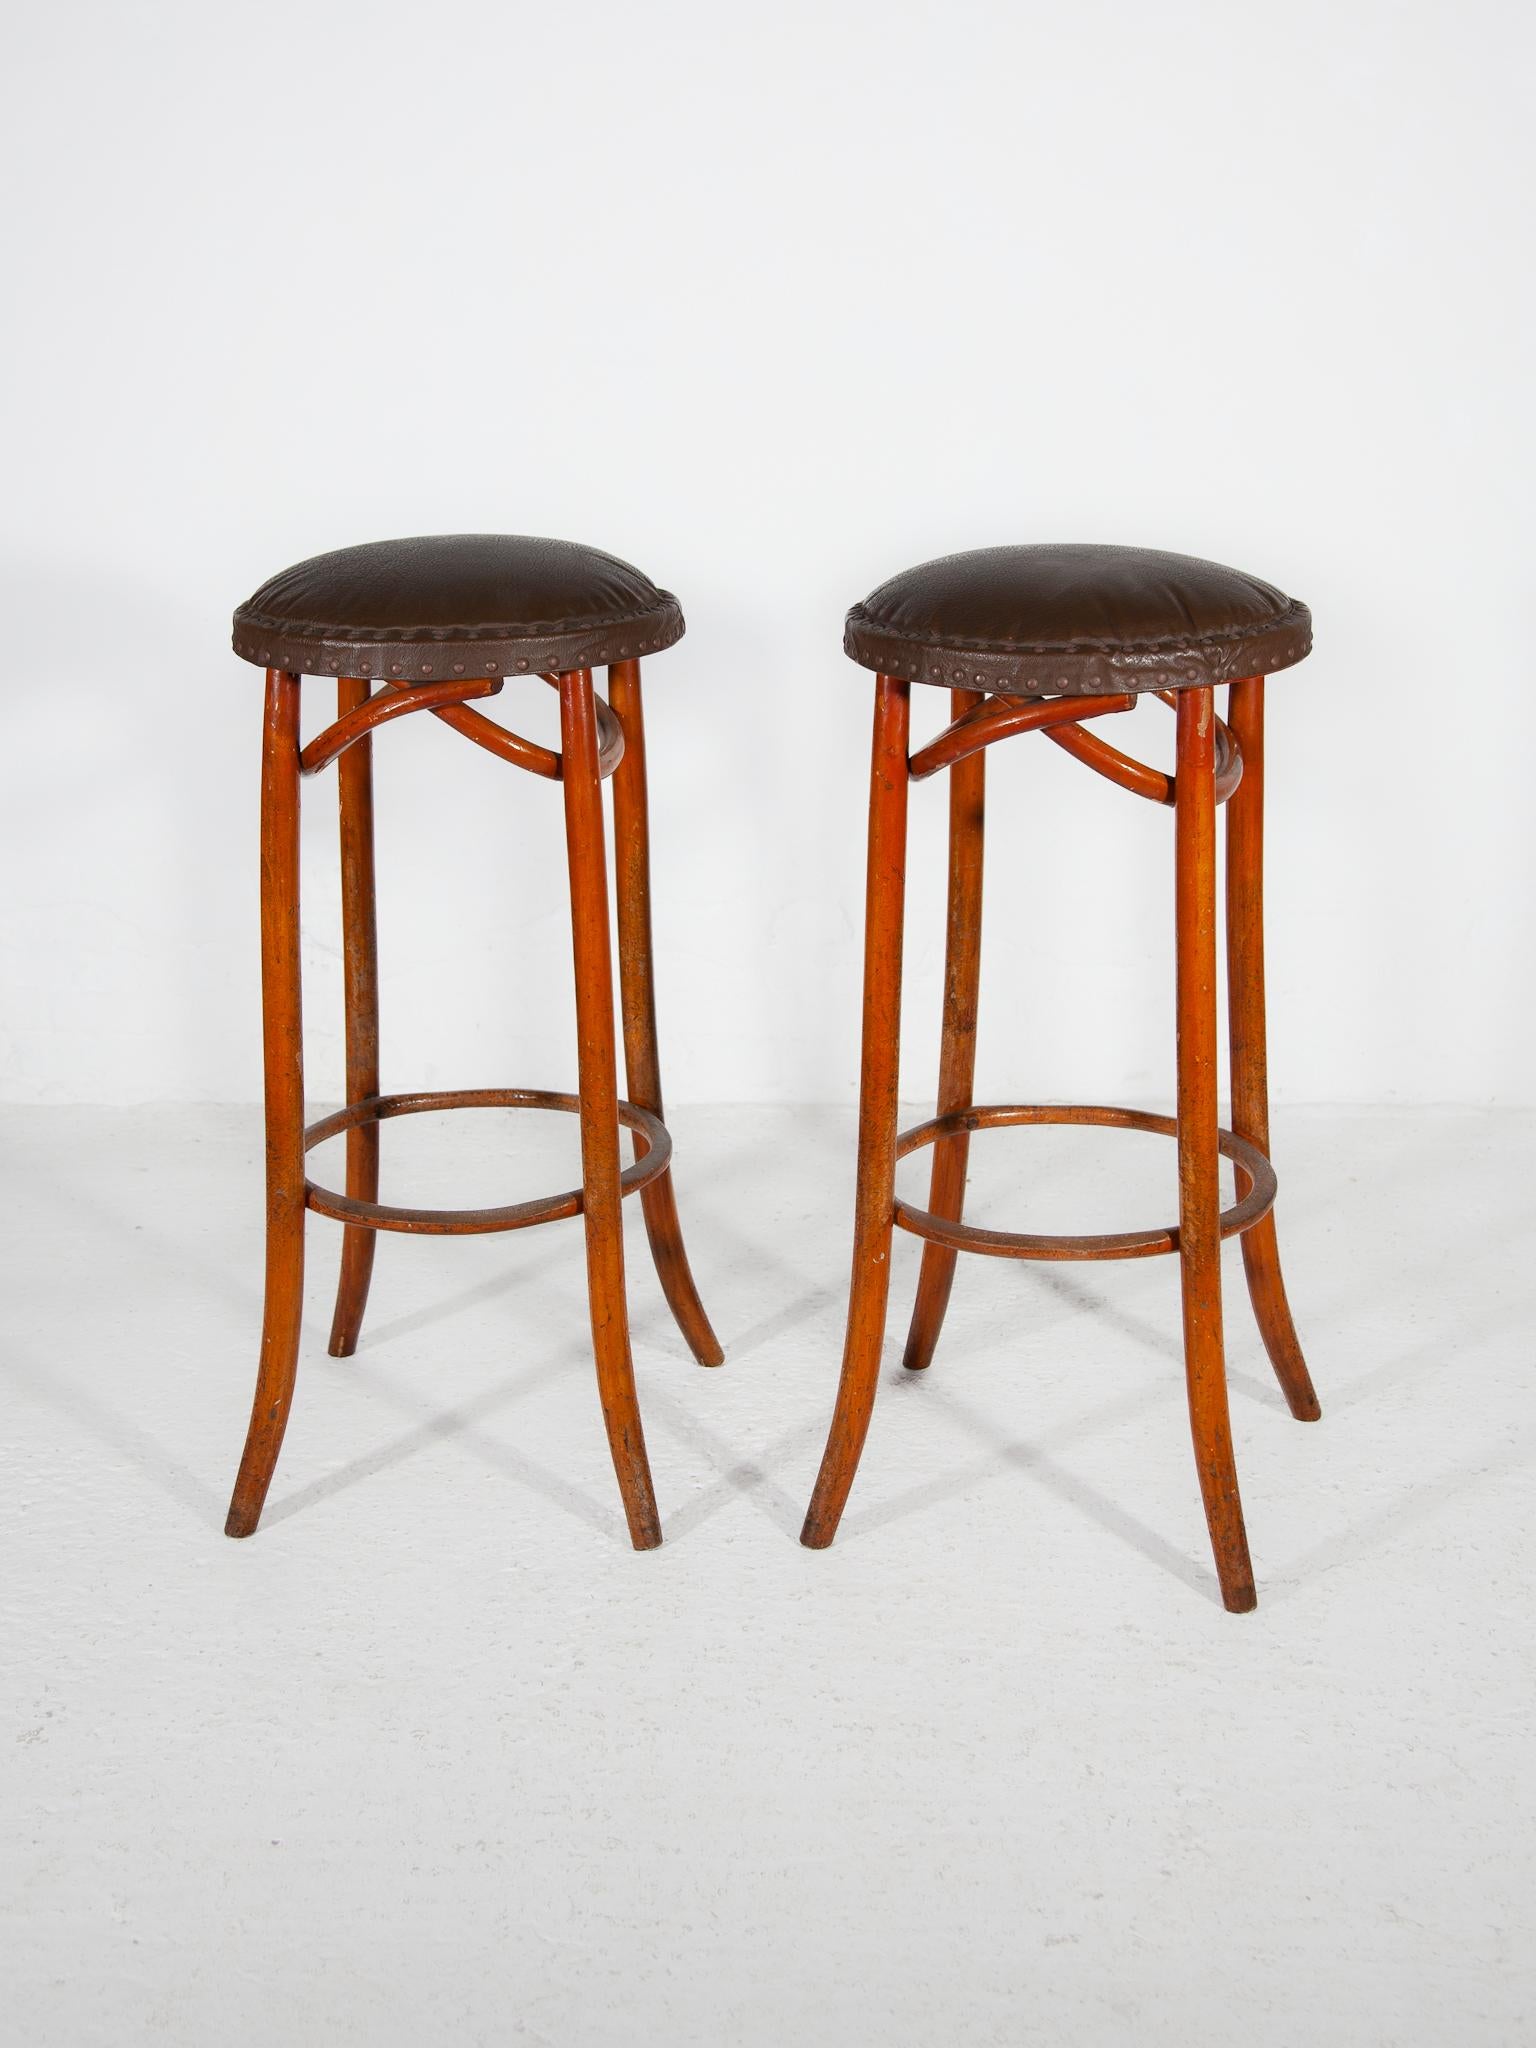 Mid-20th Century Set of Two Thonet Bentwood Cafe Bar Stools and Padded Leather Seat.